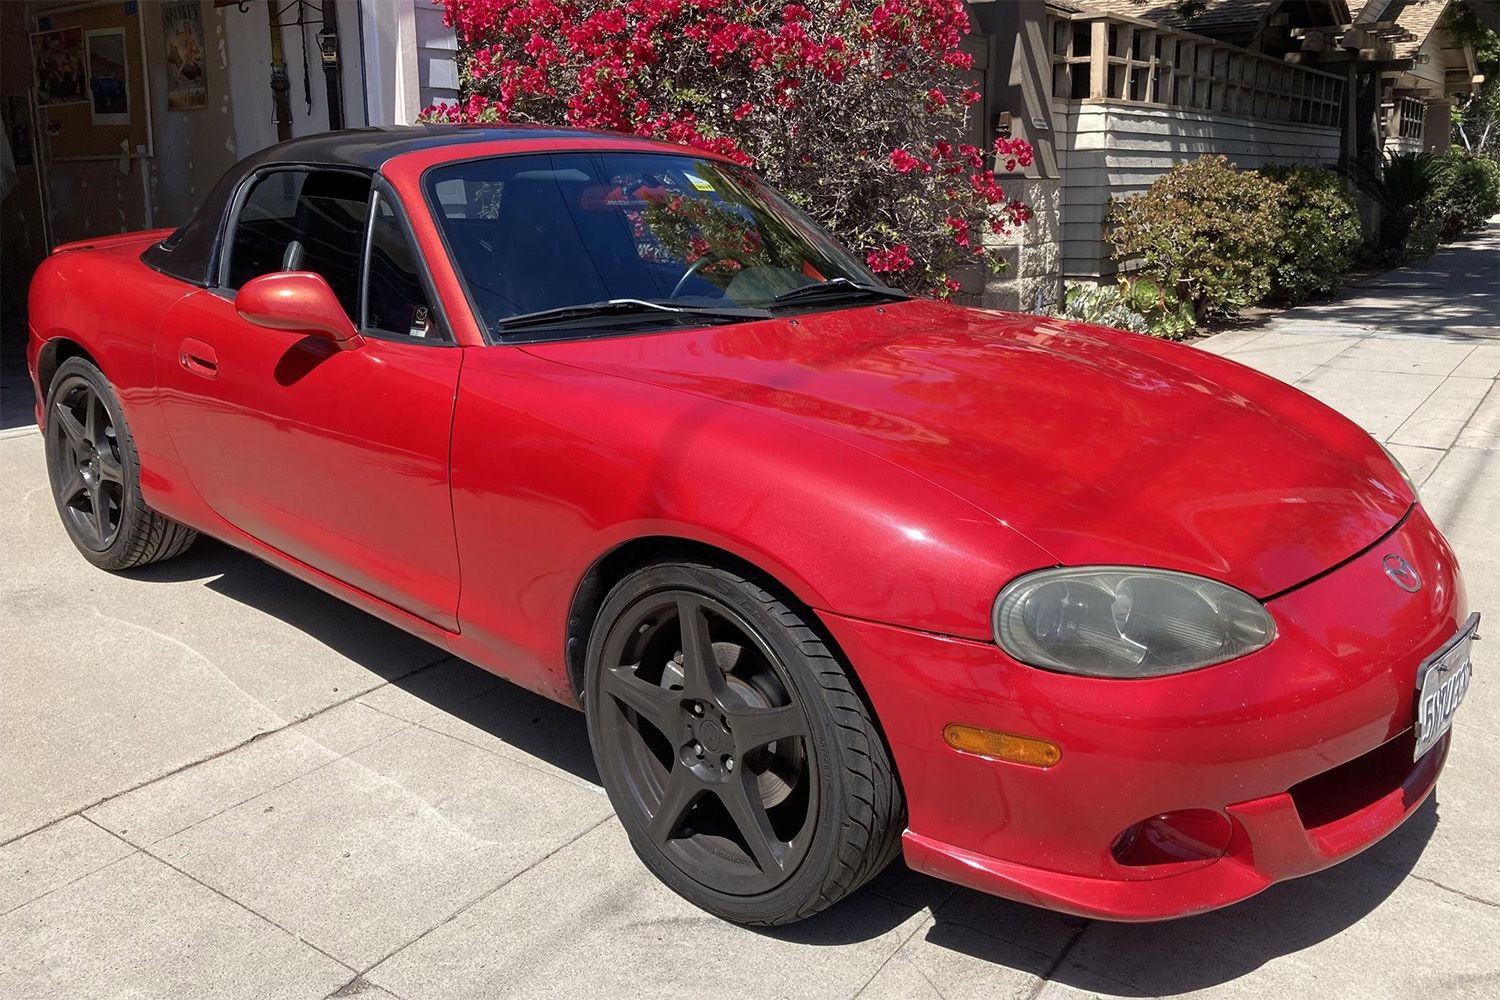 2004 Red Mazdaspeed Miata Convertible Roadster parked in driveway in San Diego, California